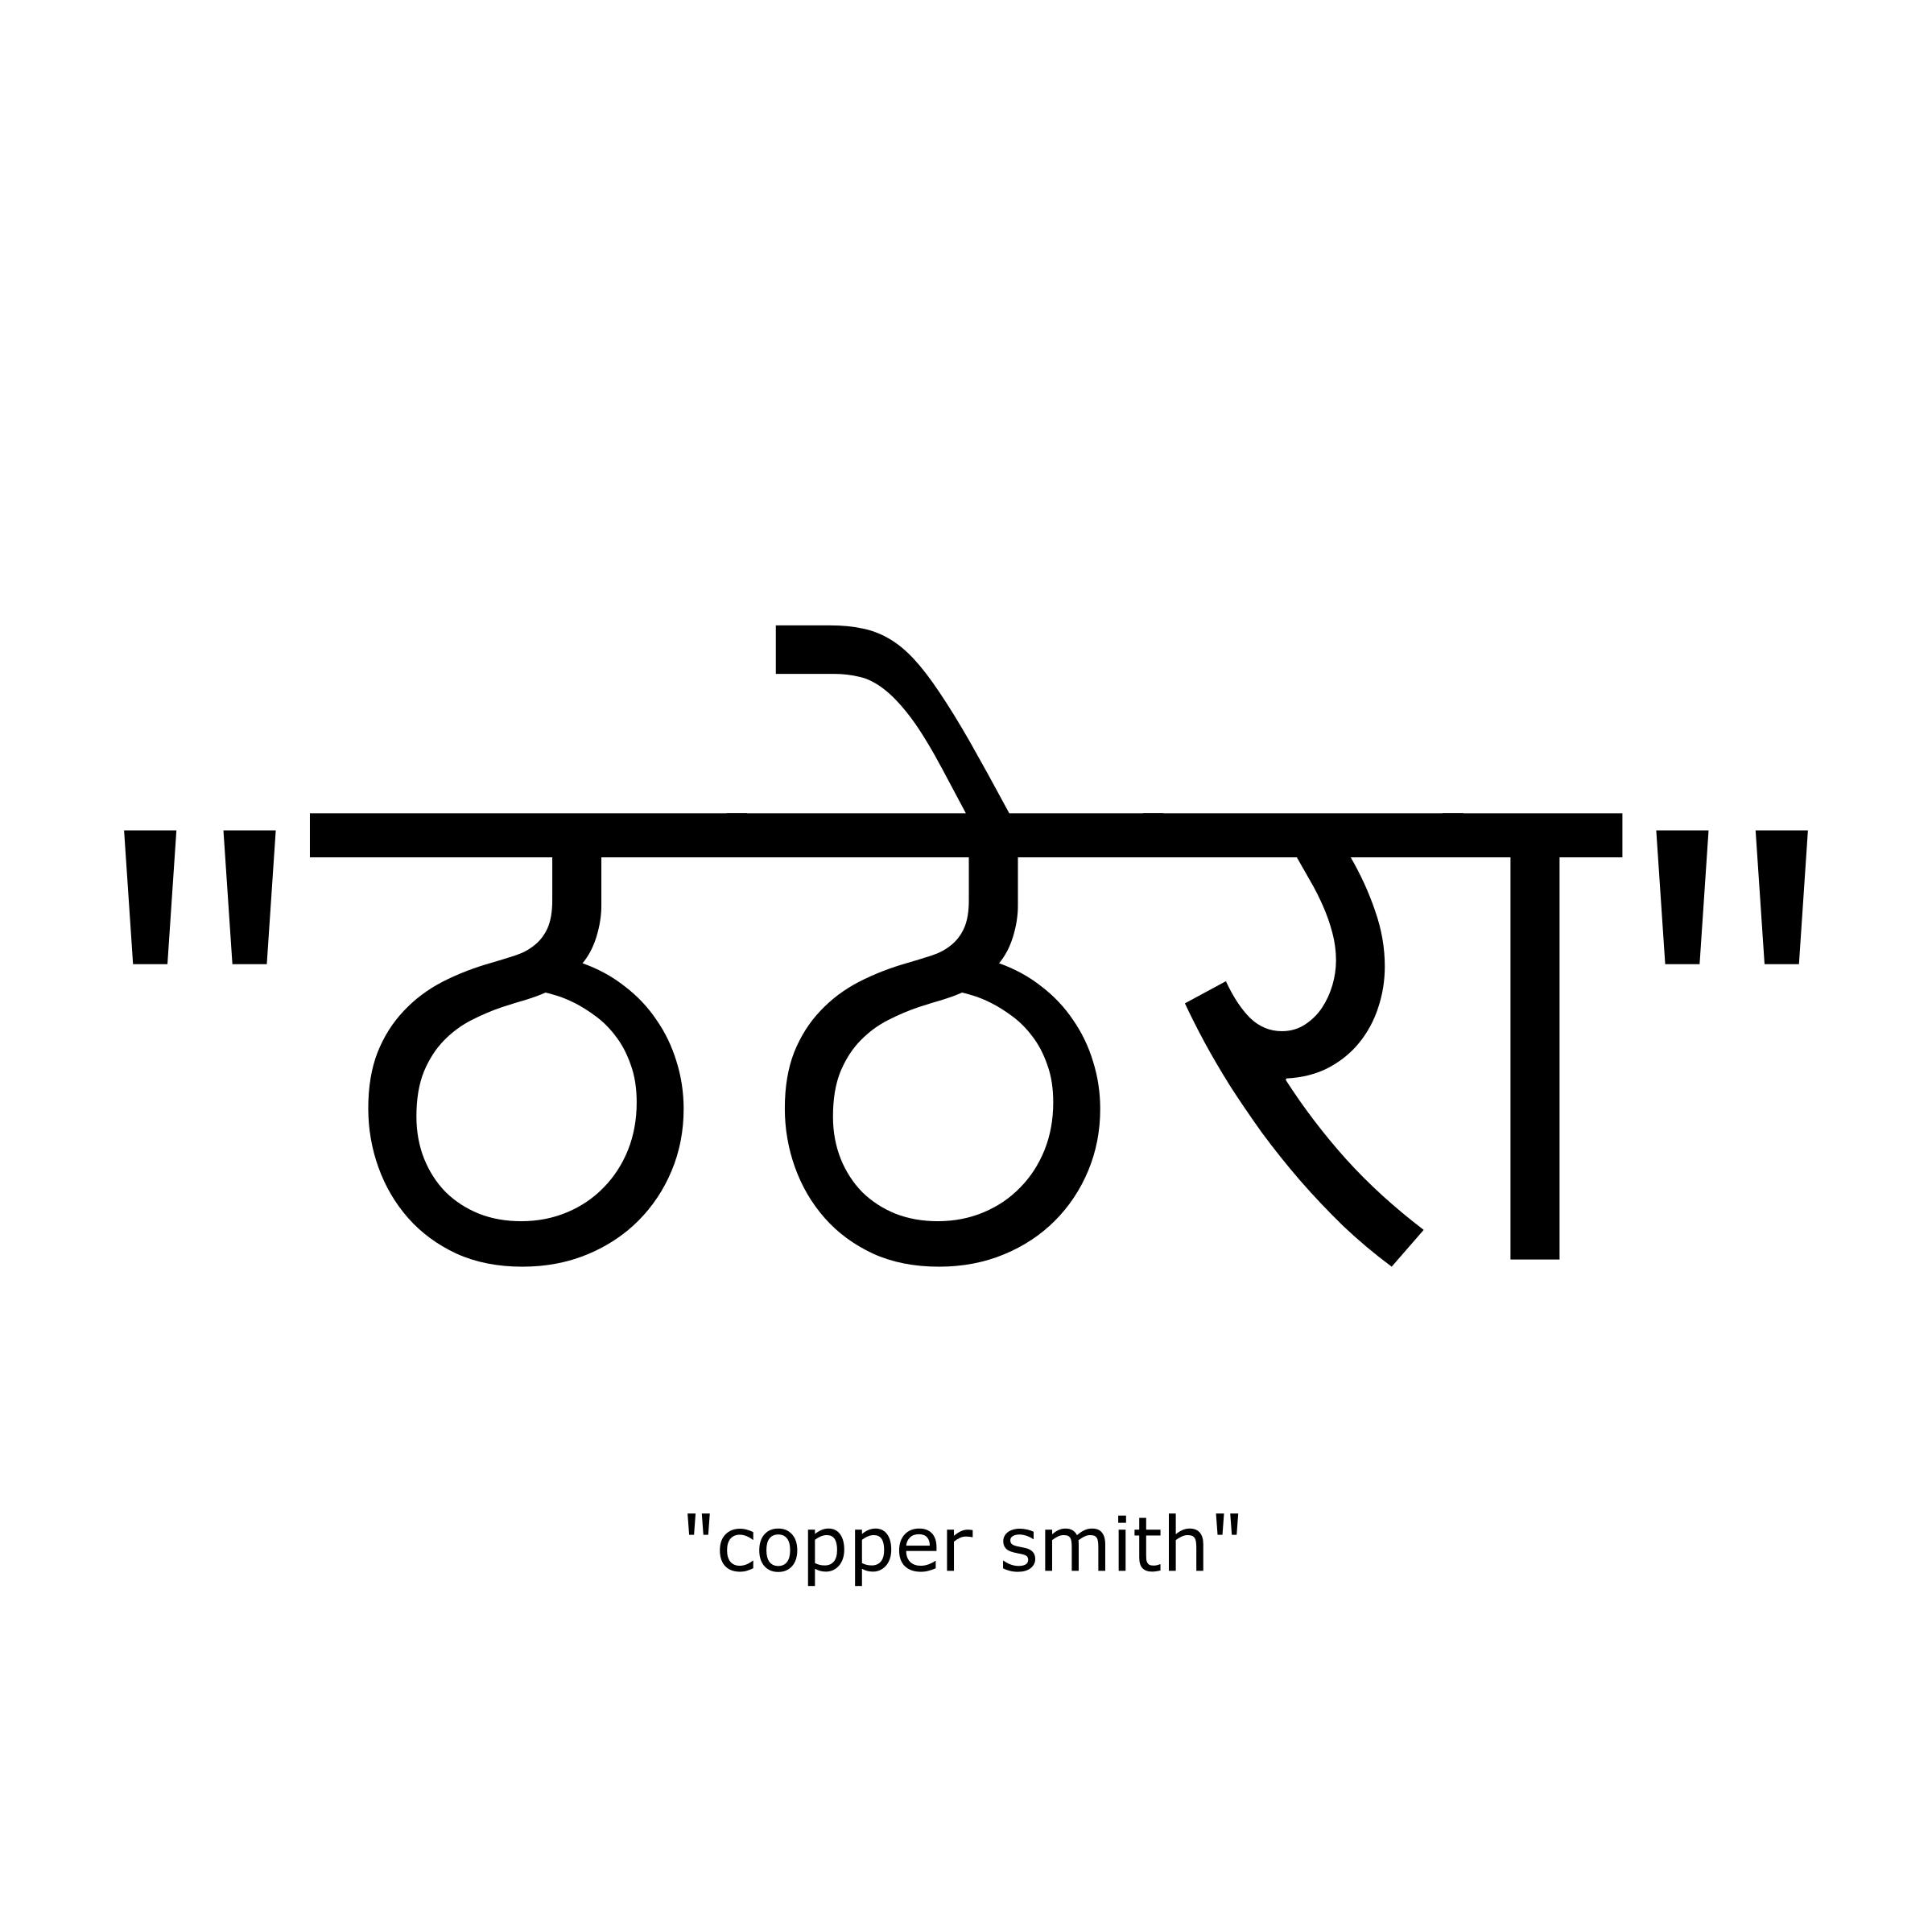 REQUEST Indian Copper Smith Image png